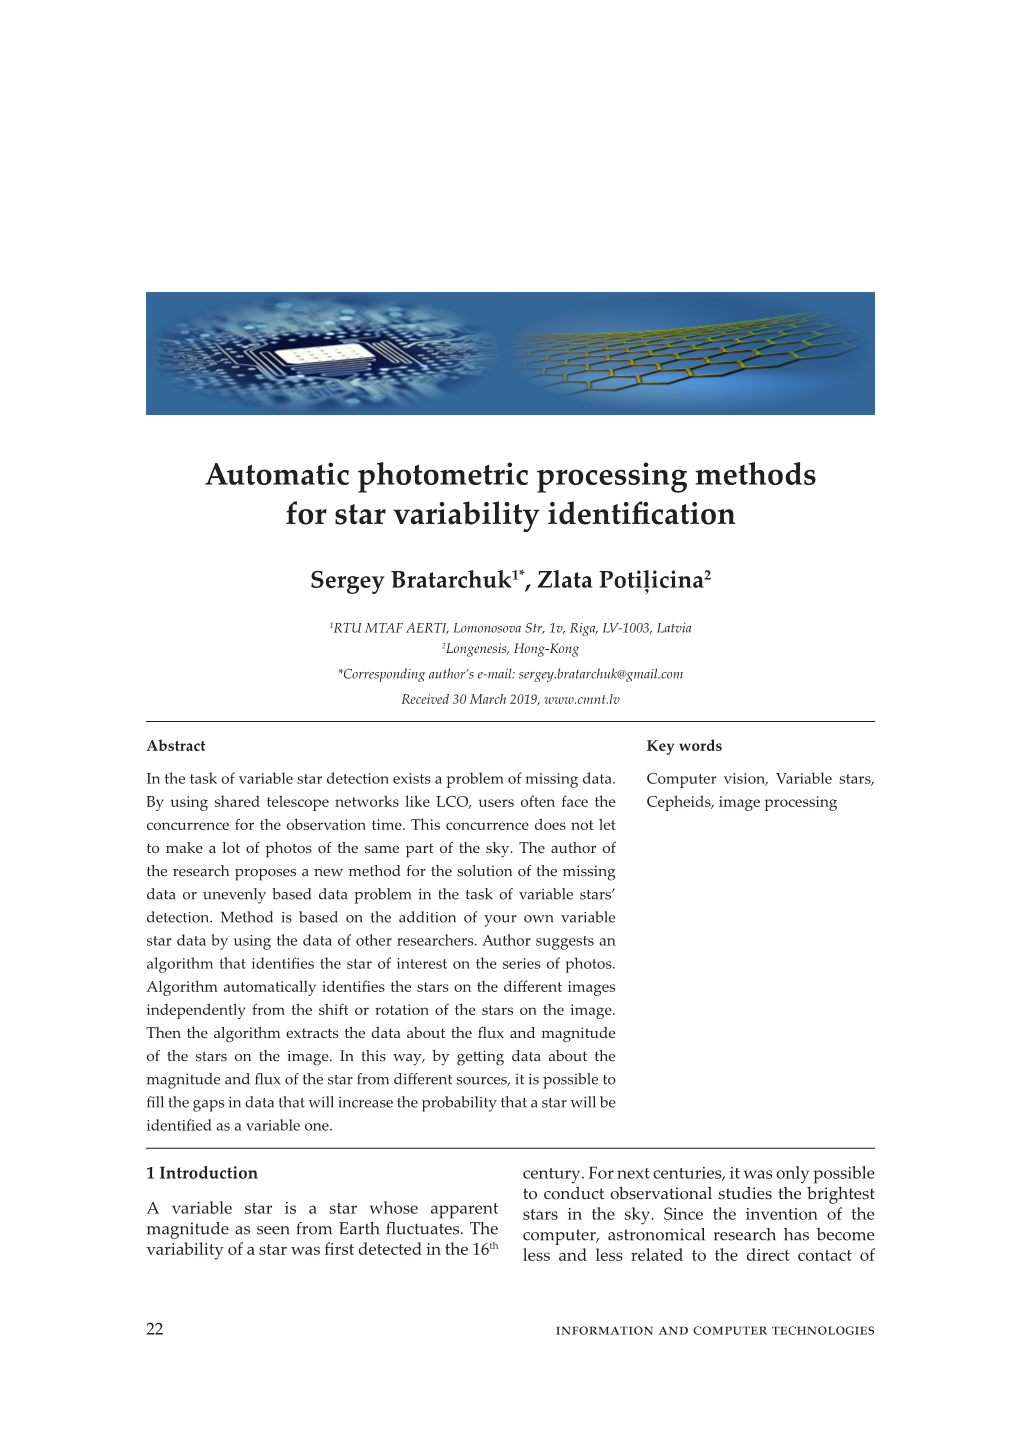 Automatic Photometric Processing Methods for Star Variability Identification